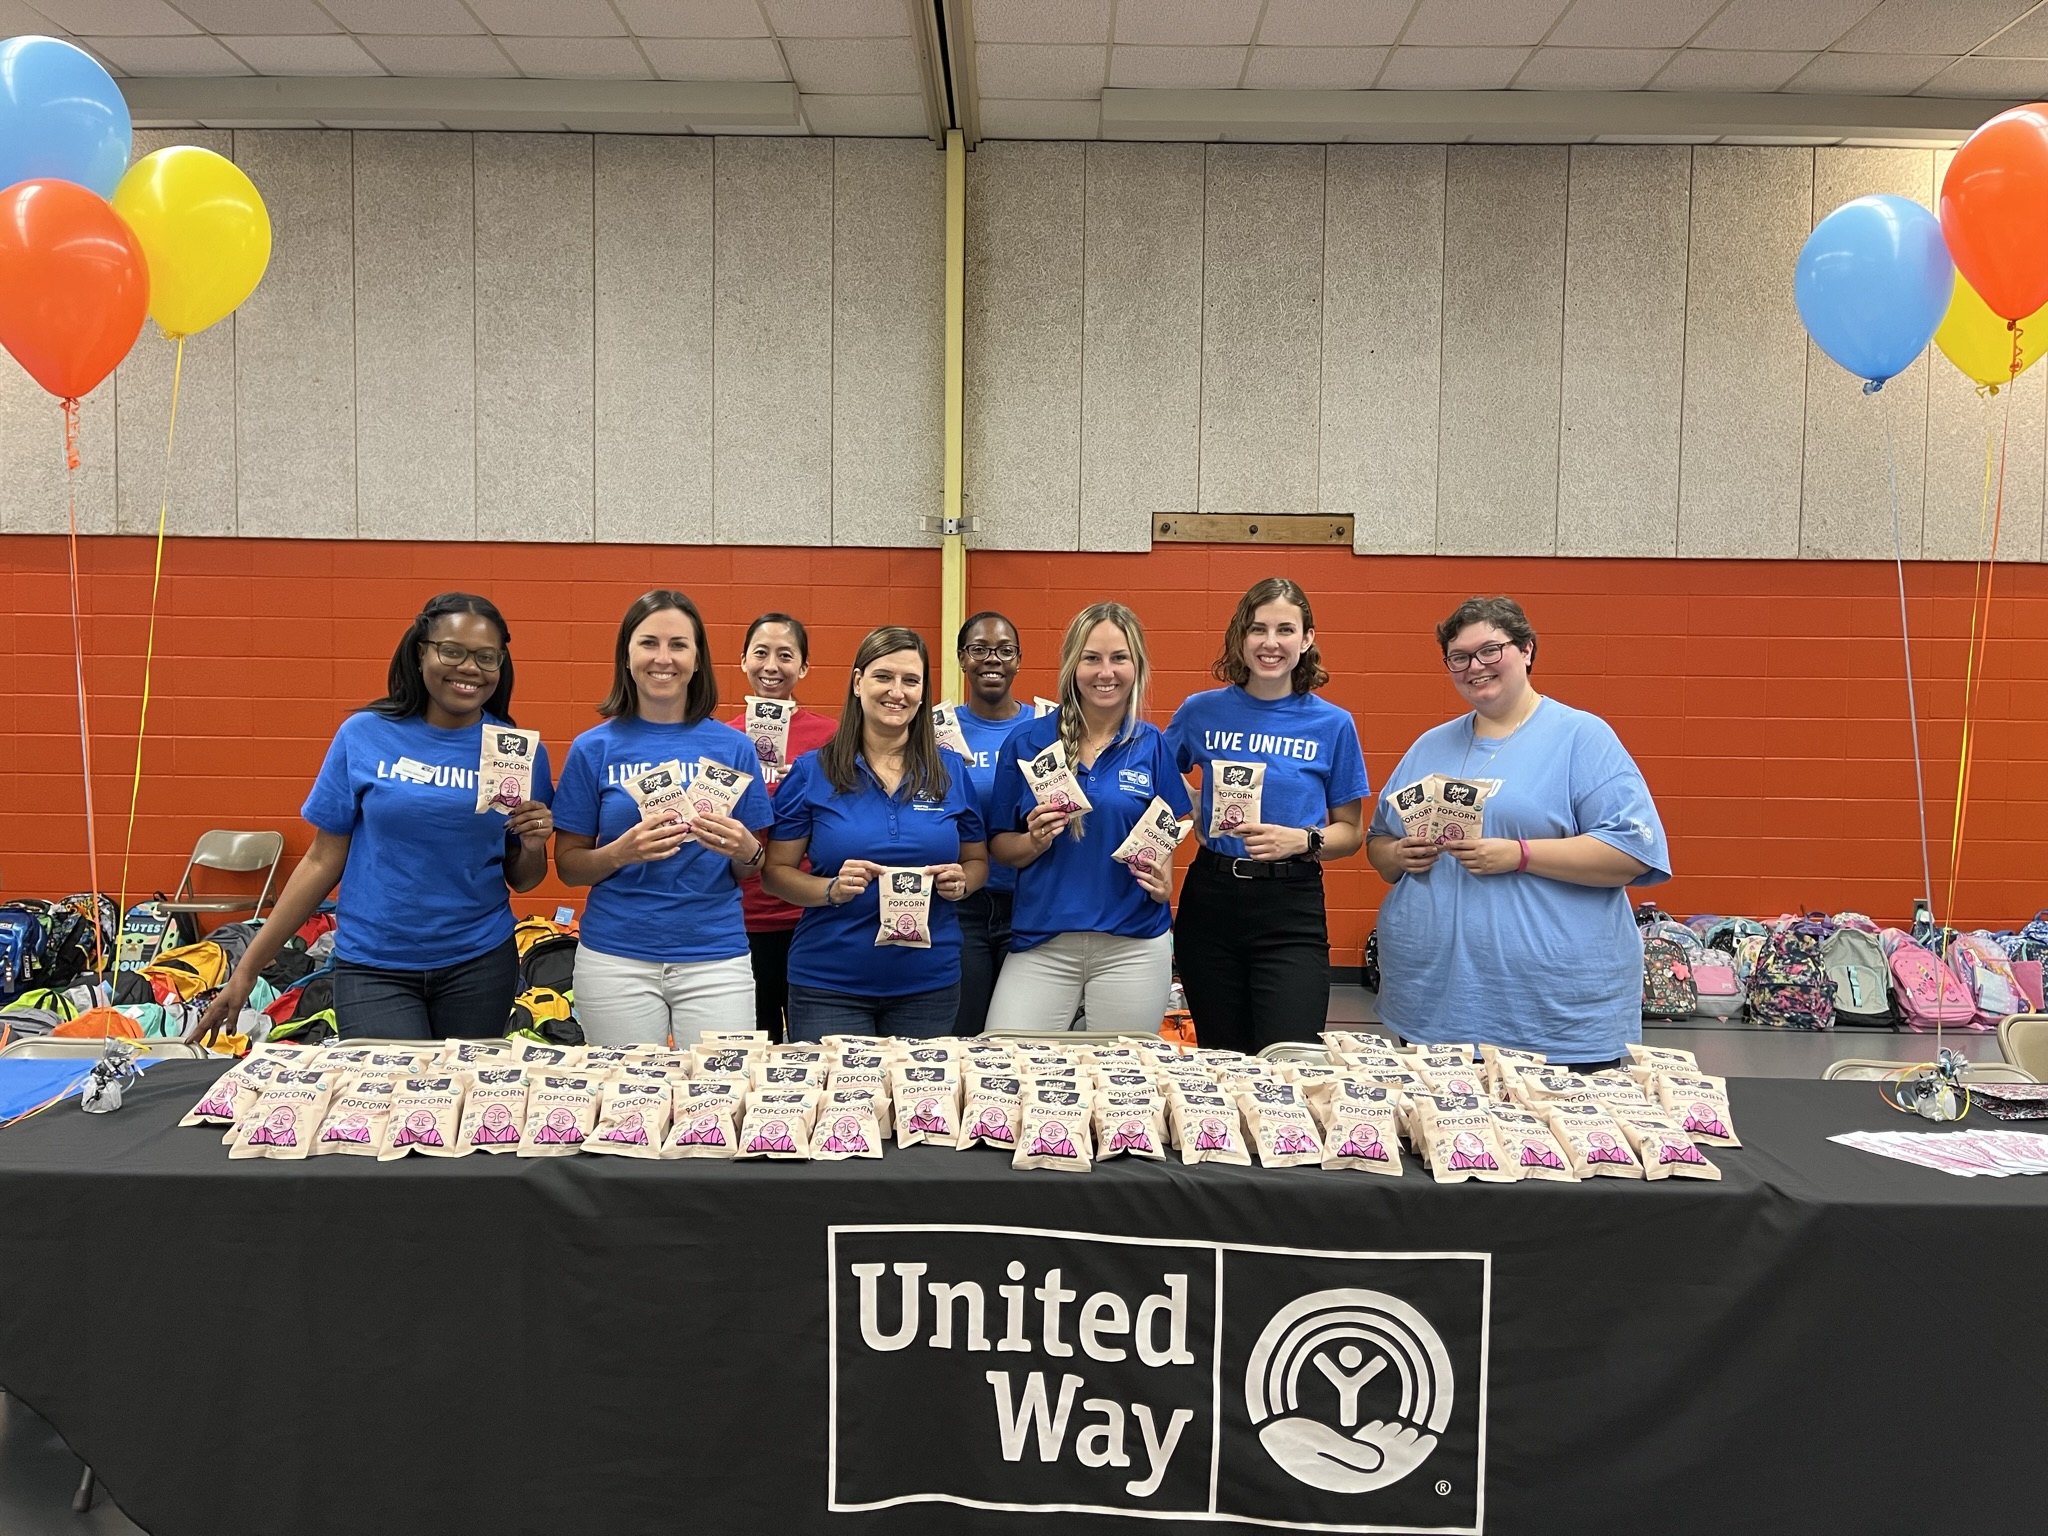 United Way of Western Connecticut's Back-to-School Program 2022